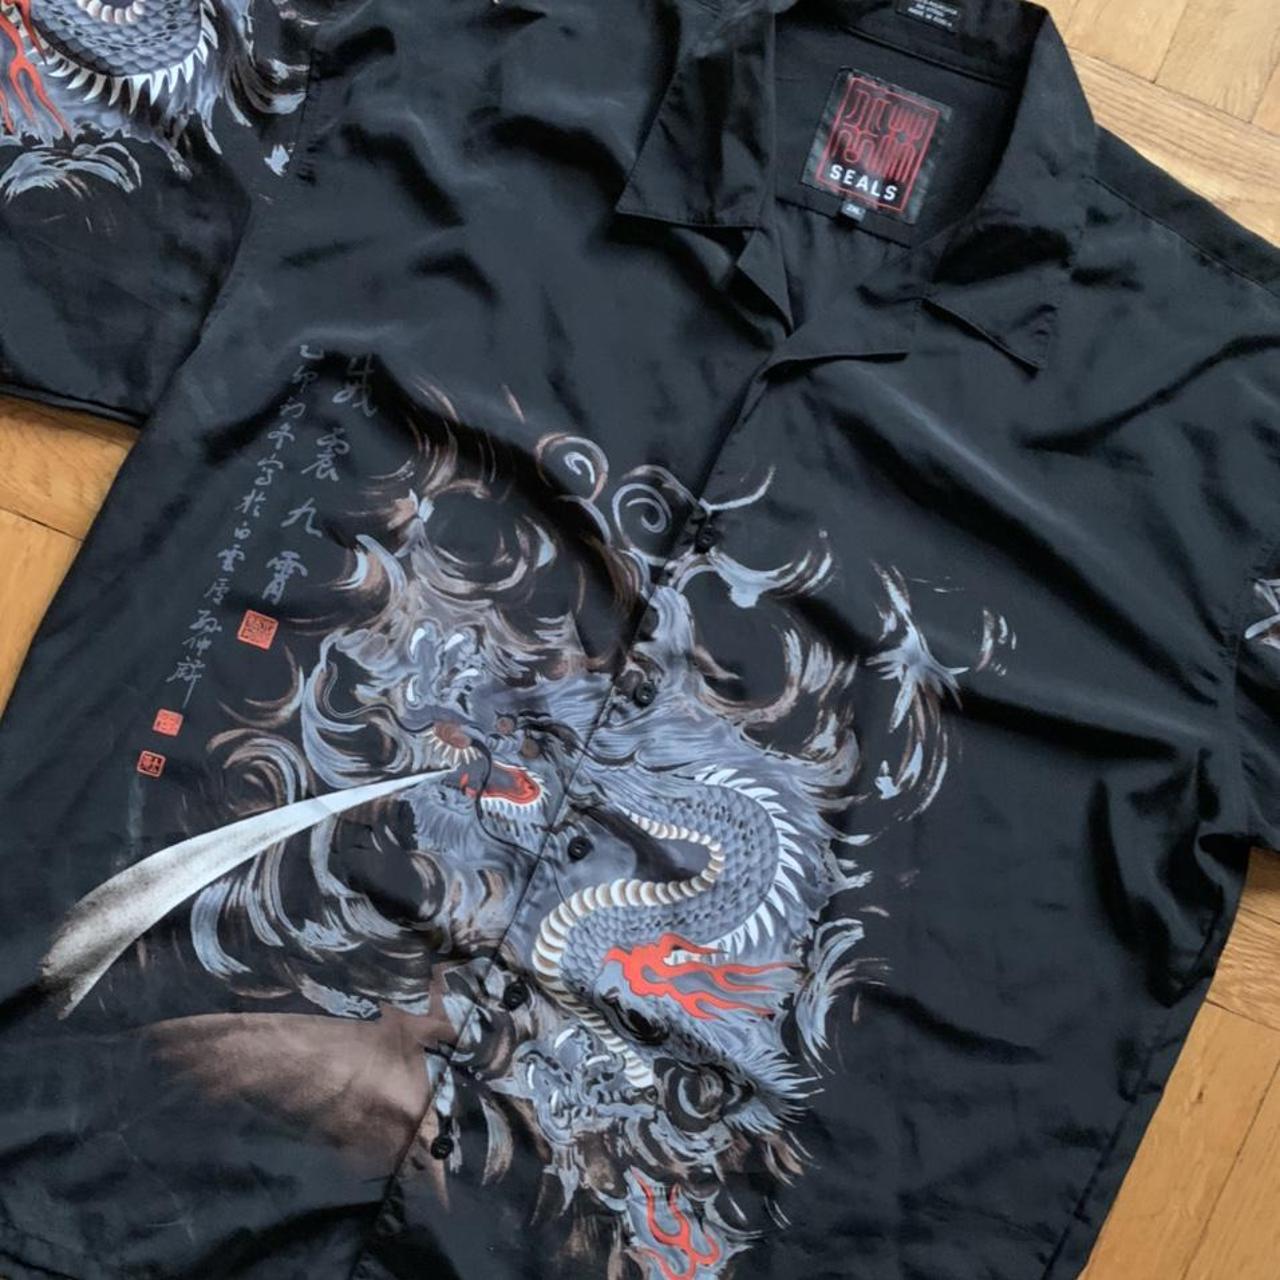 Vintage 2000s Y2K Ancient Japanese Dragon Tiger Anime Button Up shirt for  Sale in Goulds, FL - OfferUp | Anime shirt, Ancient japanese, Button up  shirts